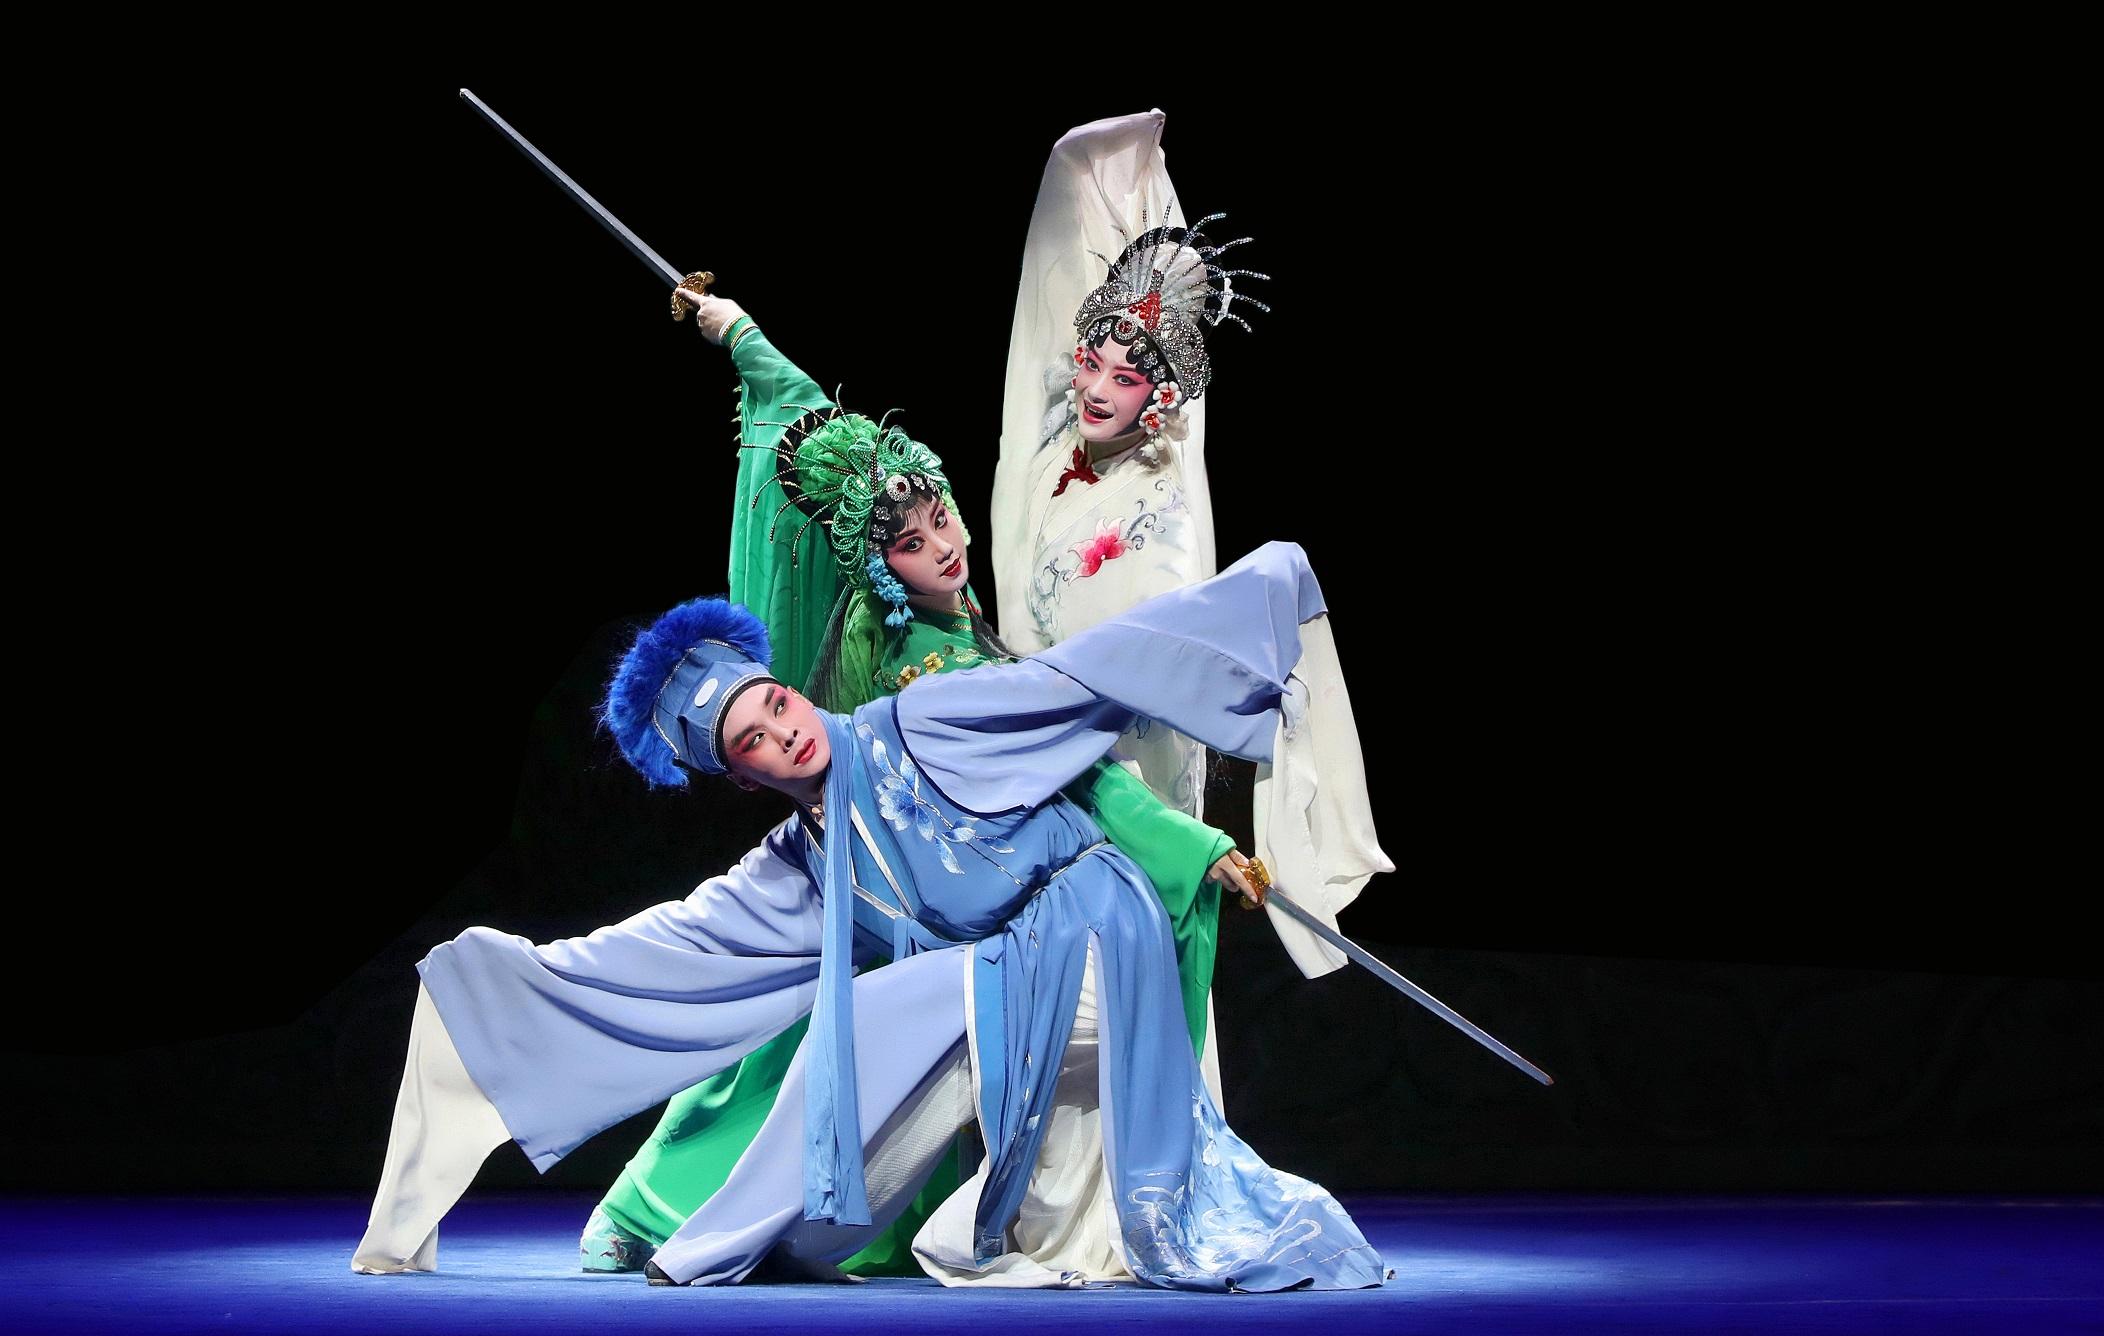 The Leisure and Cultural Services Department has invited the Zhejiang Wu Opera Research Centre to return to Hong Kong for three stunning performances in late July at this year's Chinese Opera Festival. Photo shows a scene from "The Legend of the White Snake".